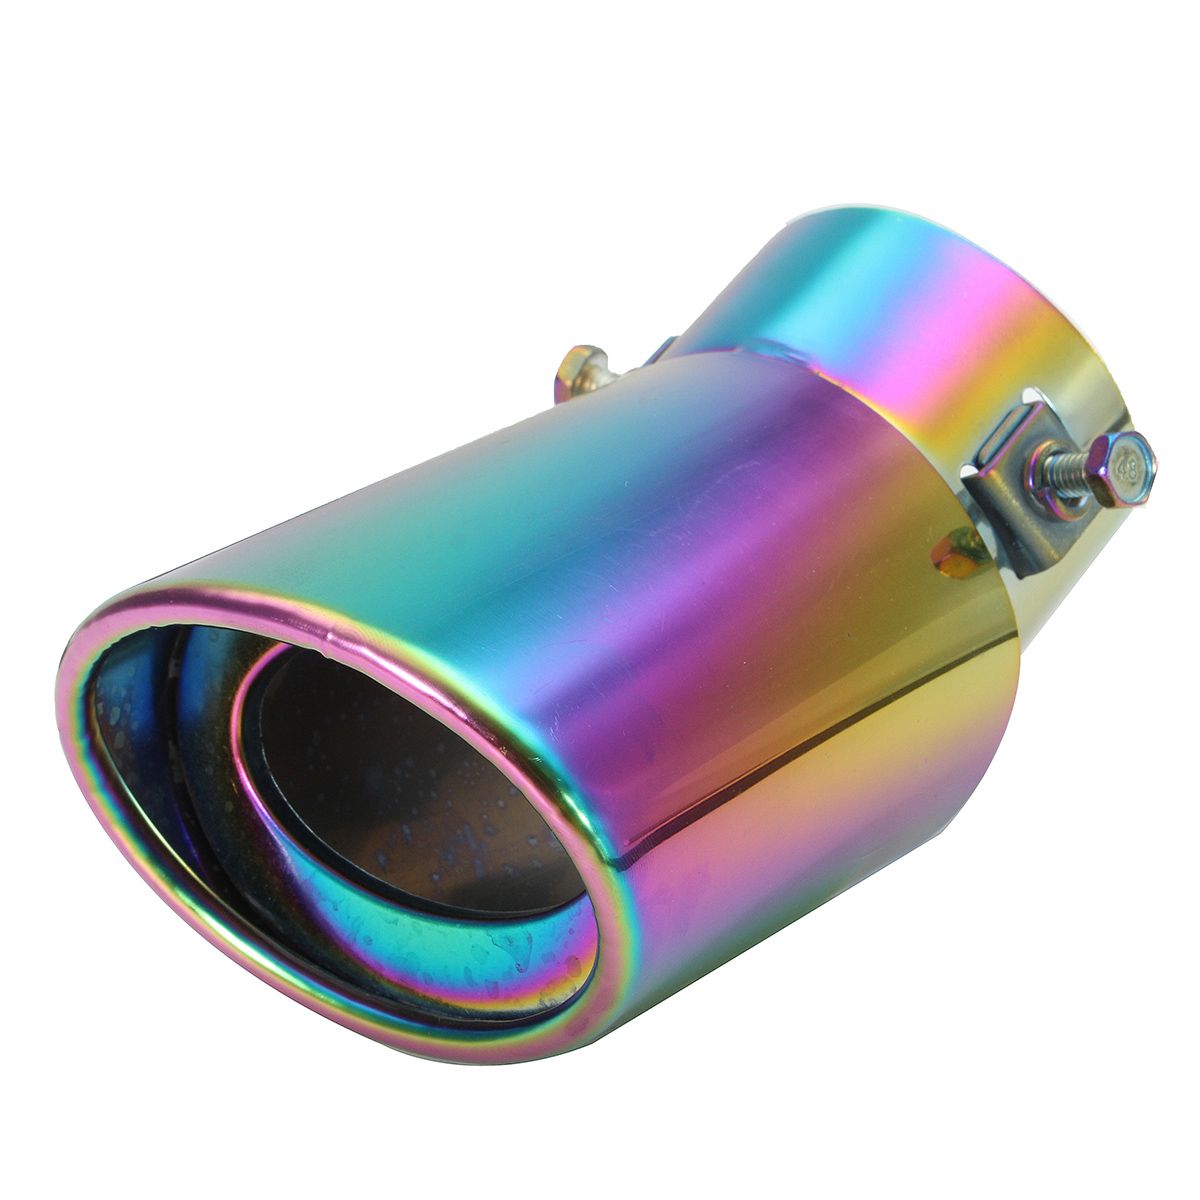 60mm-Stainless-Steel-Universal-Curved-Car-Exhaust-Muffler-Pipe-For-Chevrolet-Toyota-Ford-Suzuki-1088219